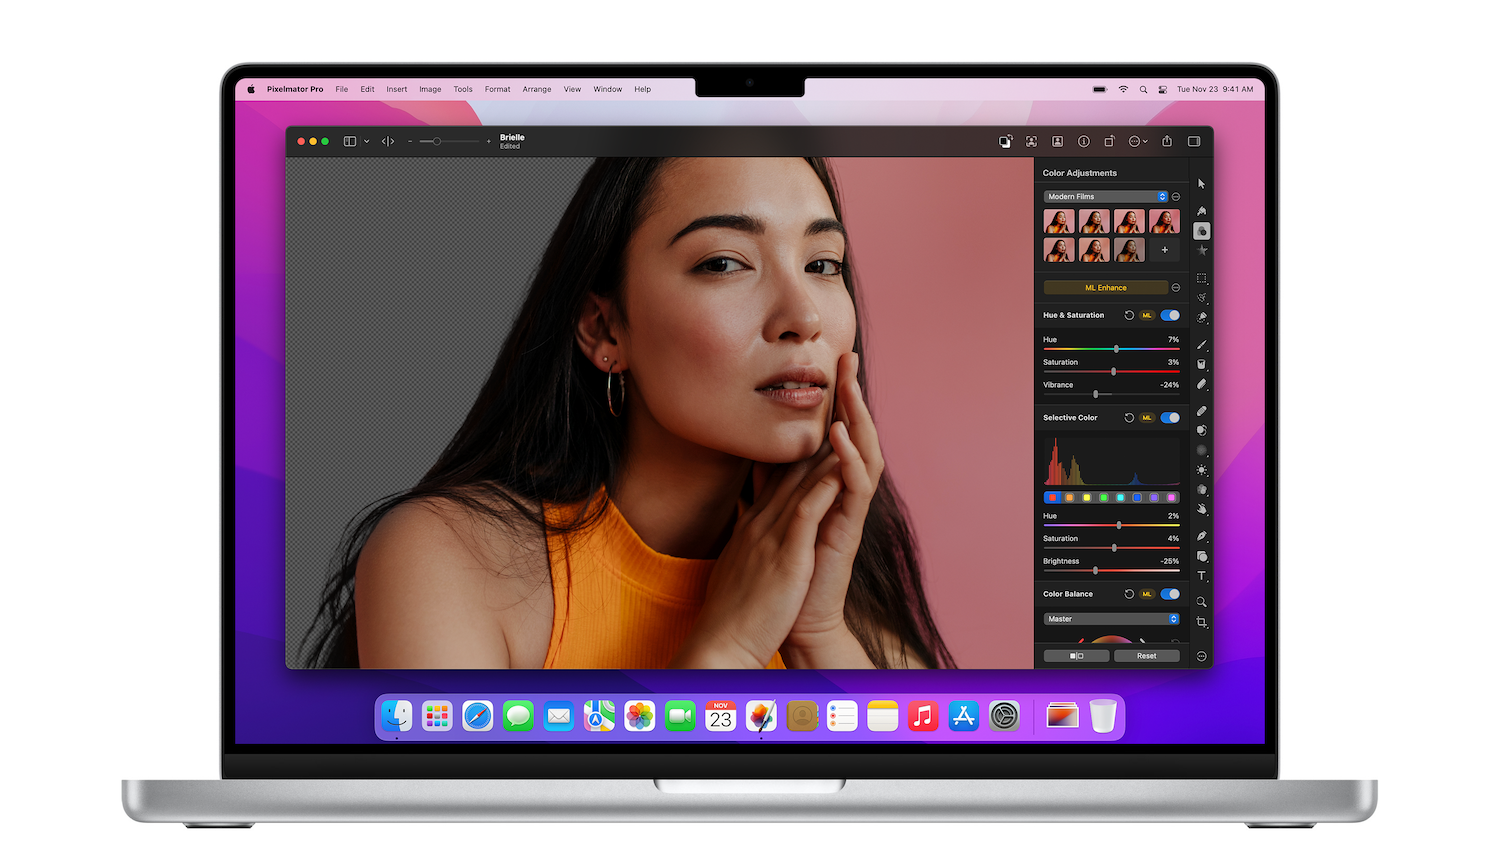 Pixelmator: The image editing application designed exclusively for the Mac platform